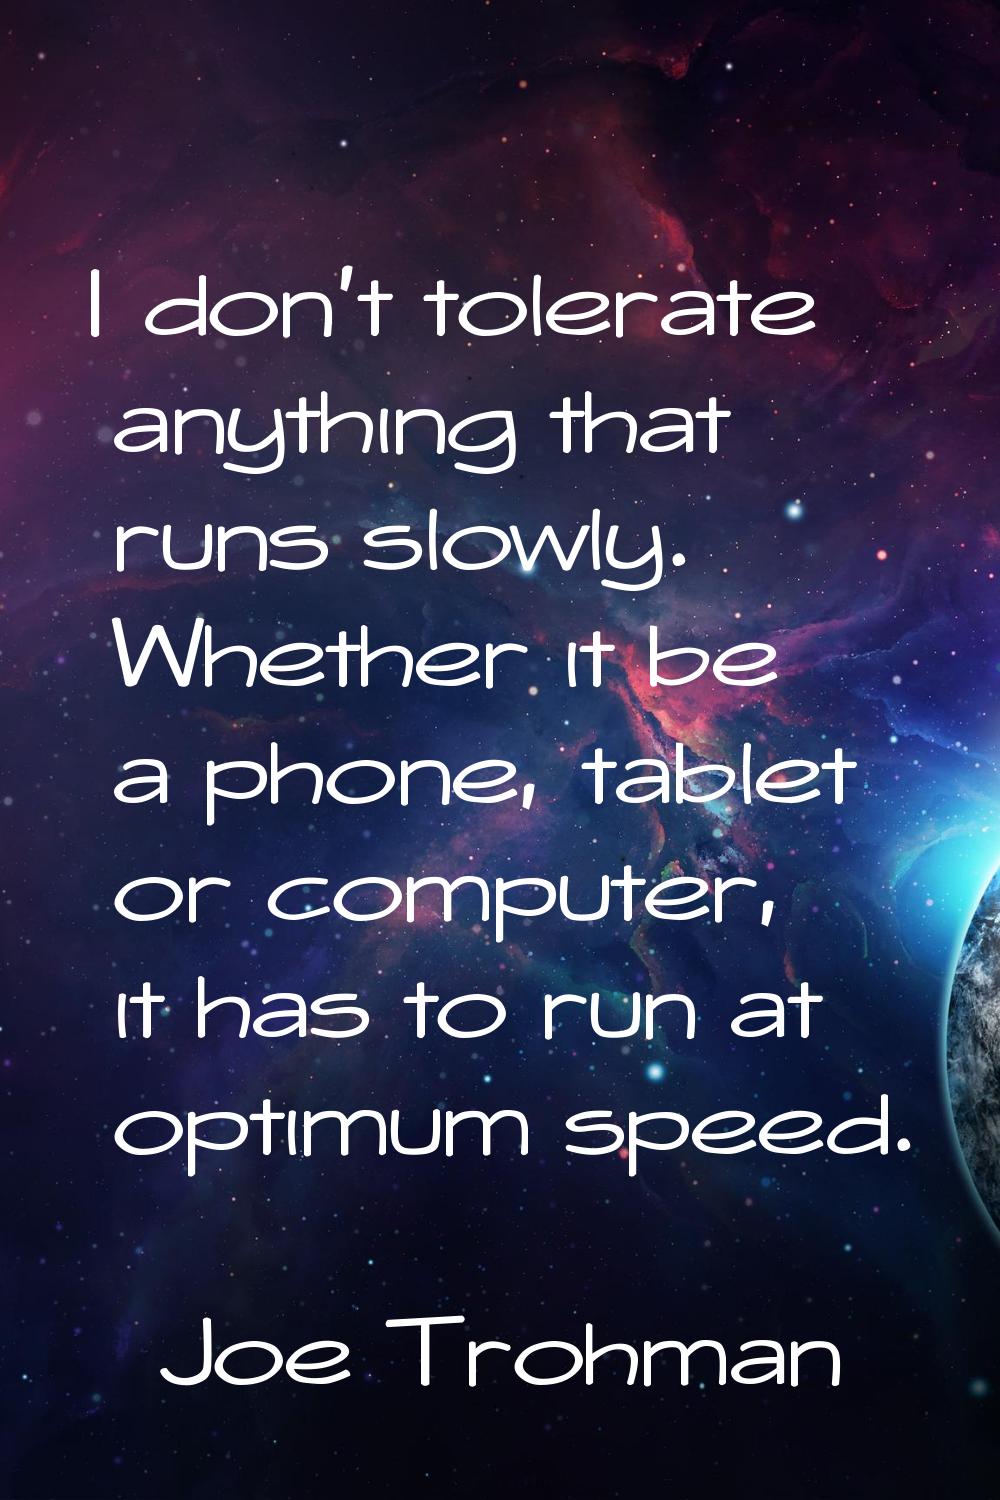 I don't tolerate anything that runs slowly. Whether it be a phone, tablet or computer, it has to ru